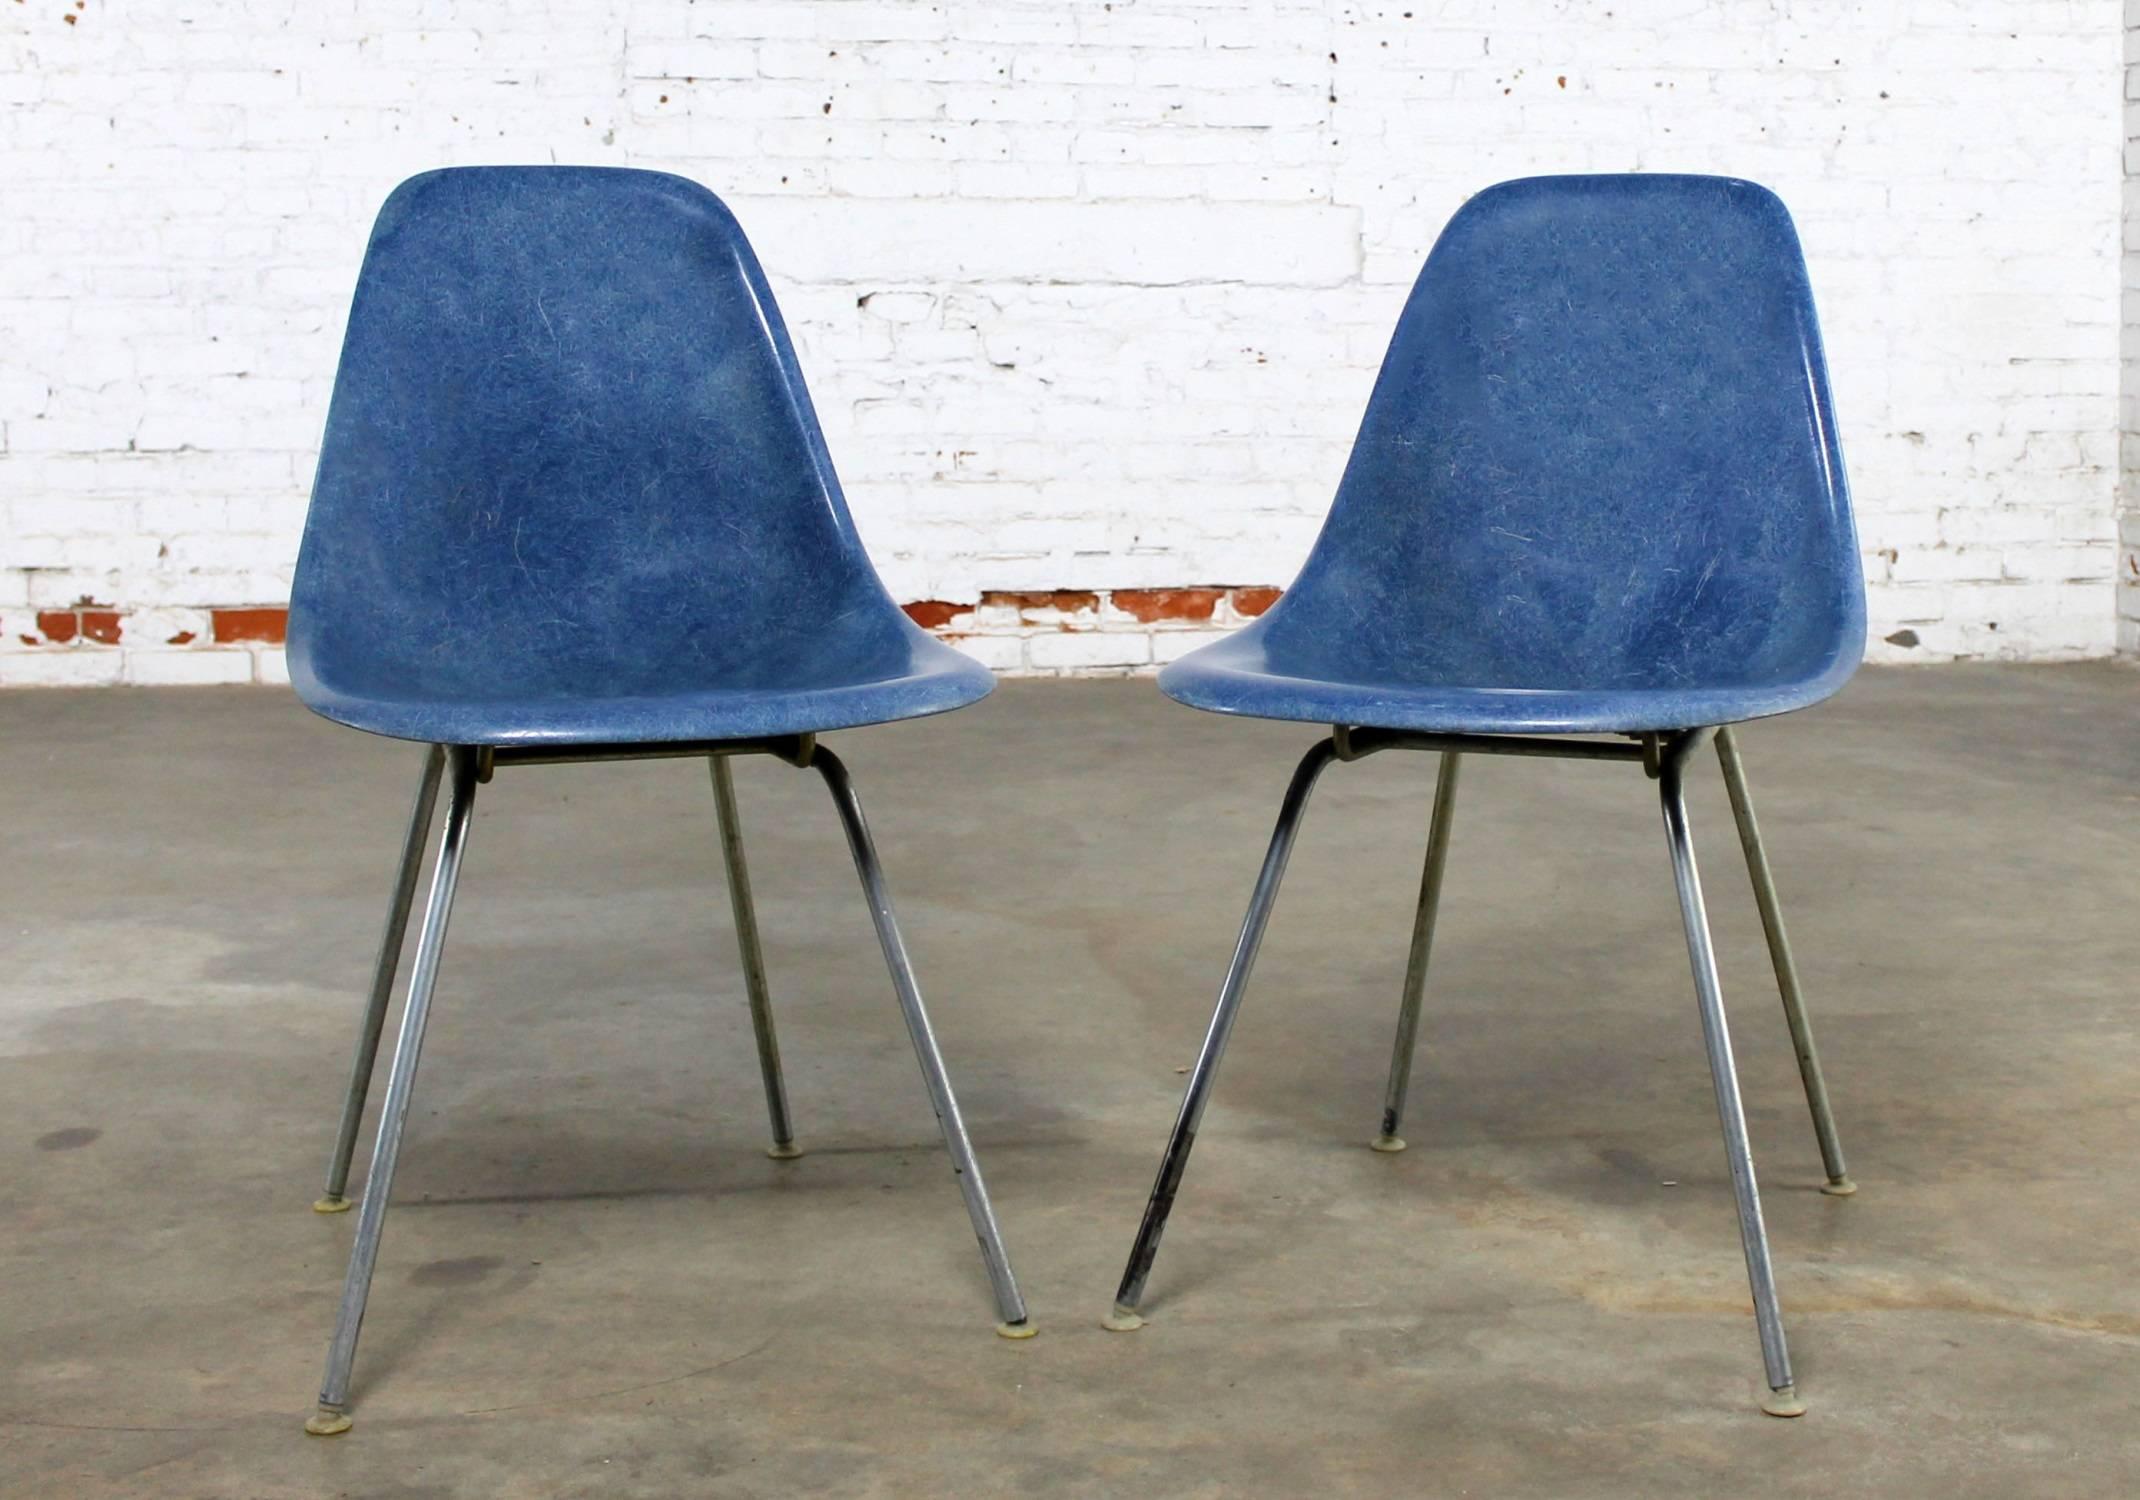 Great pair of DSX molded fiberglass side chairs by Chares and Ray Eames for Herman Miller with H base in royal blue, circa 1964. Mid-Century Modern and in wonderful vintage condition.

This is a fantastic iconic pair of chairs designed by Charles